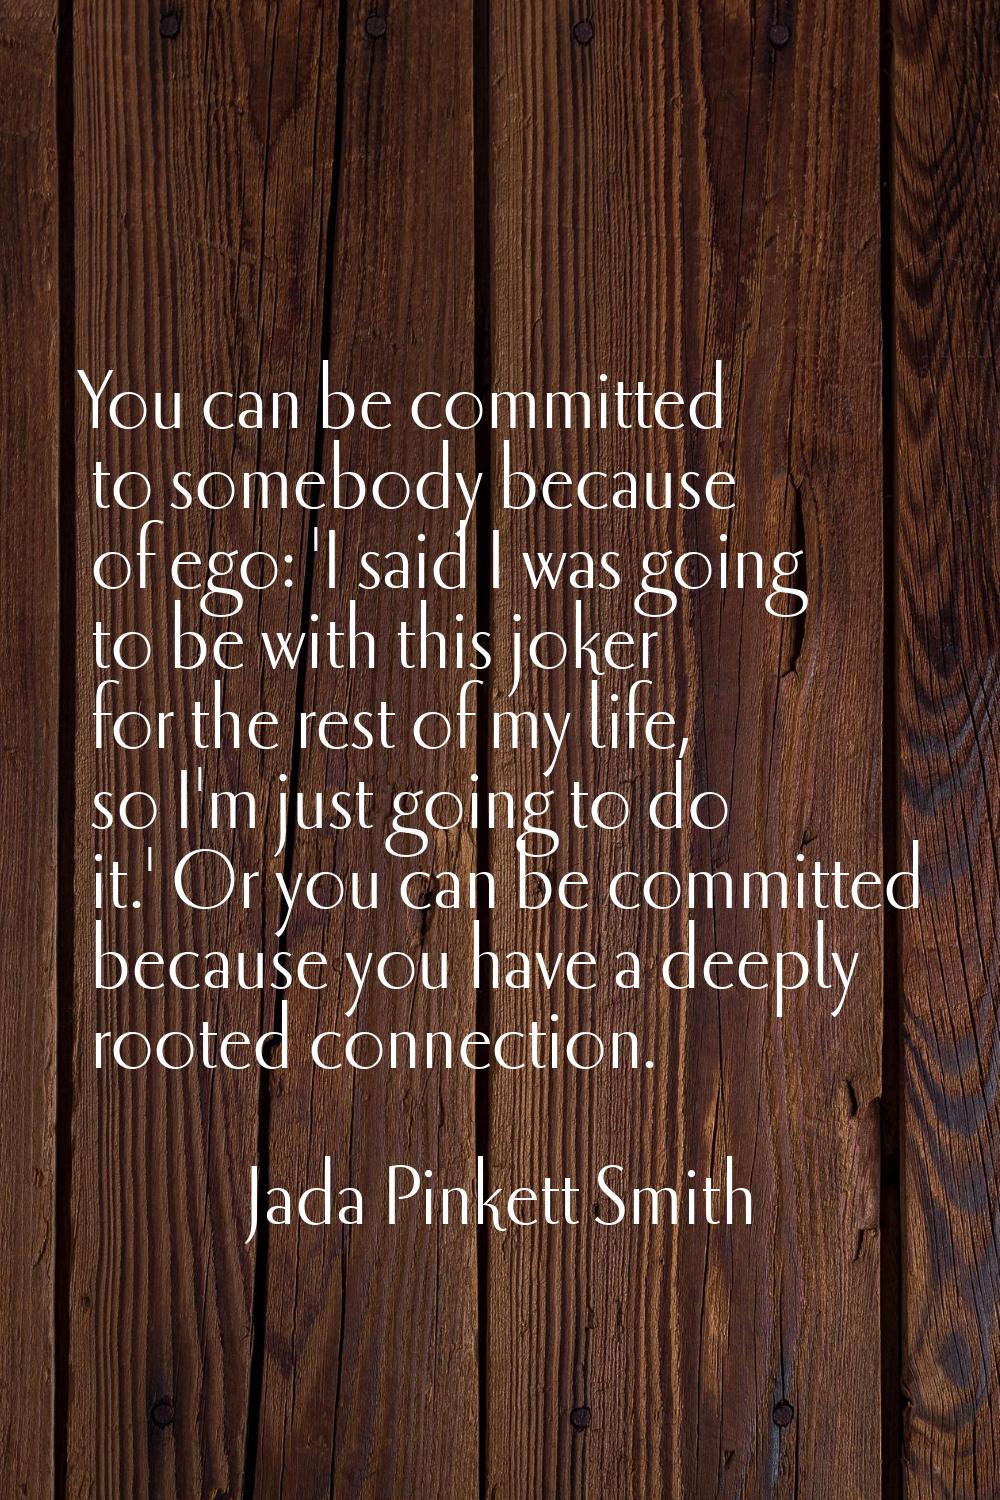 You can be committed to somebody because of ego: 'I said I was going to be with this joker for the 